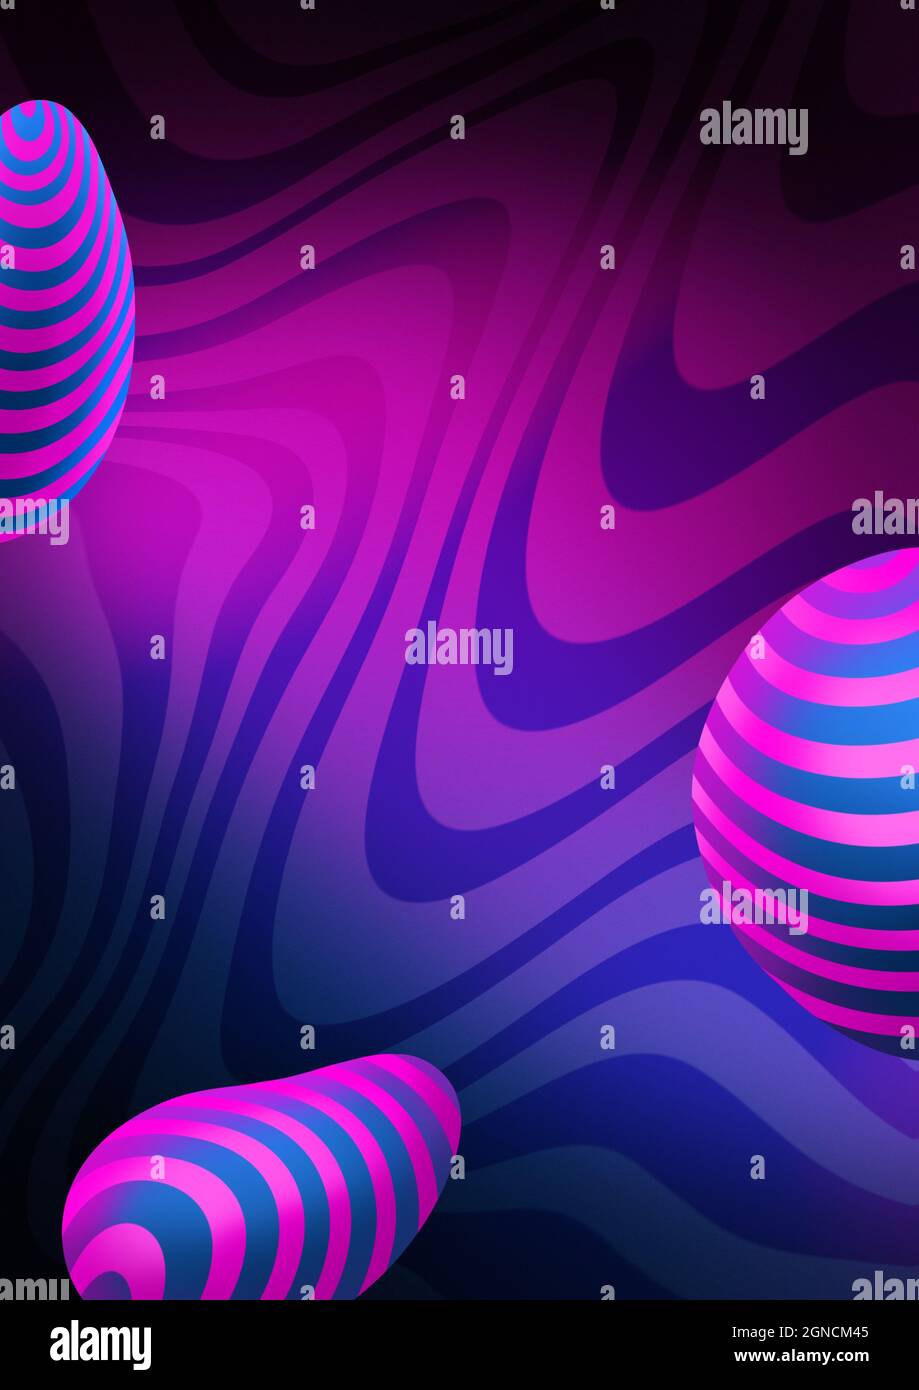 Neon geometric shapes. Glowing background. Neon social media post. Club cover. Flowing figures. Balls with striped. Fluid objects. Striped background. Stock Photo